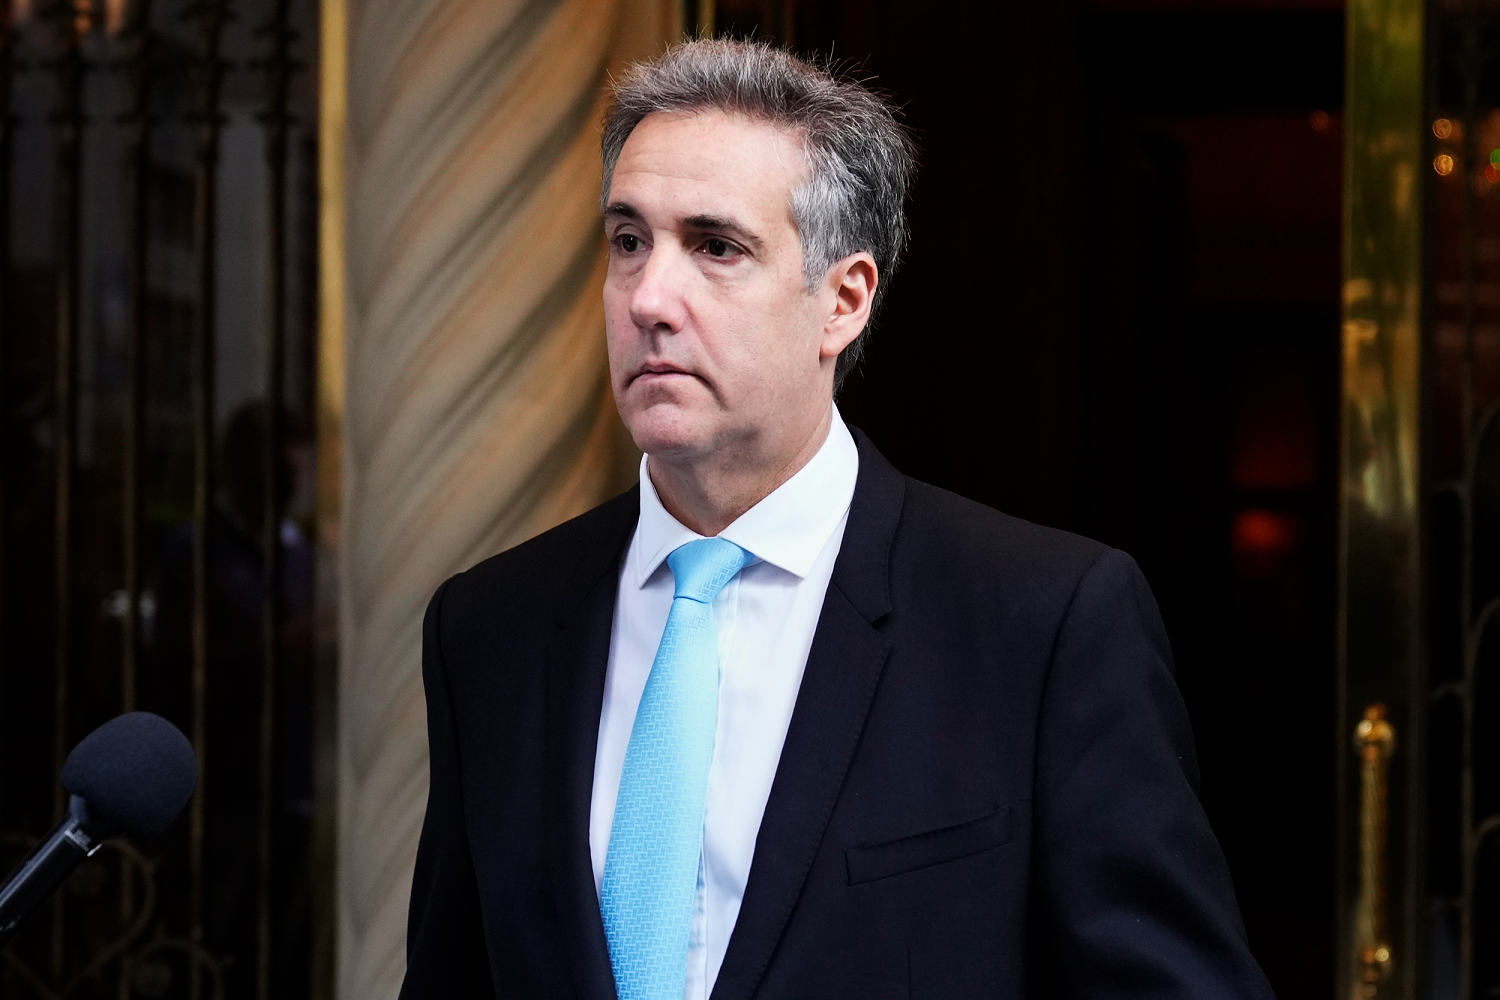 Michael Cohen admits he stole from Trump Org. during heated cross-examination